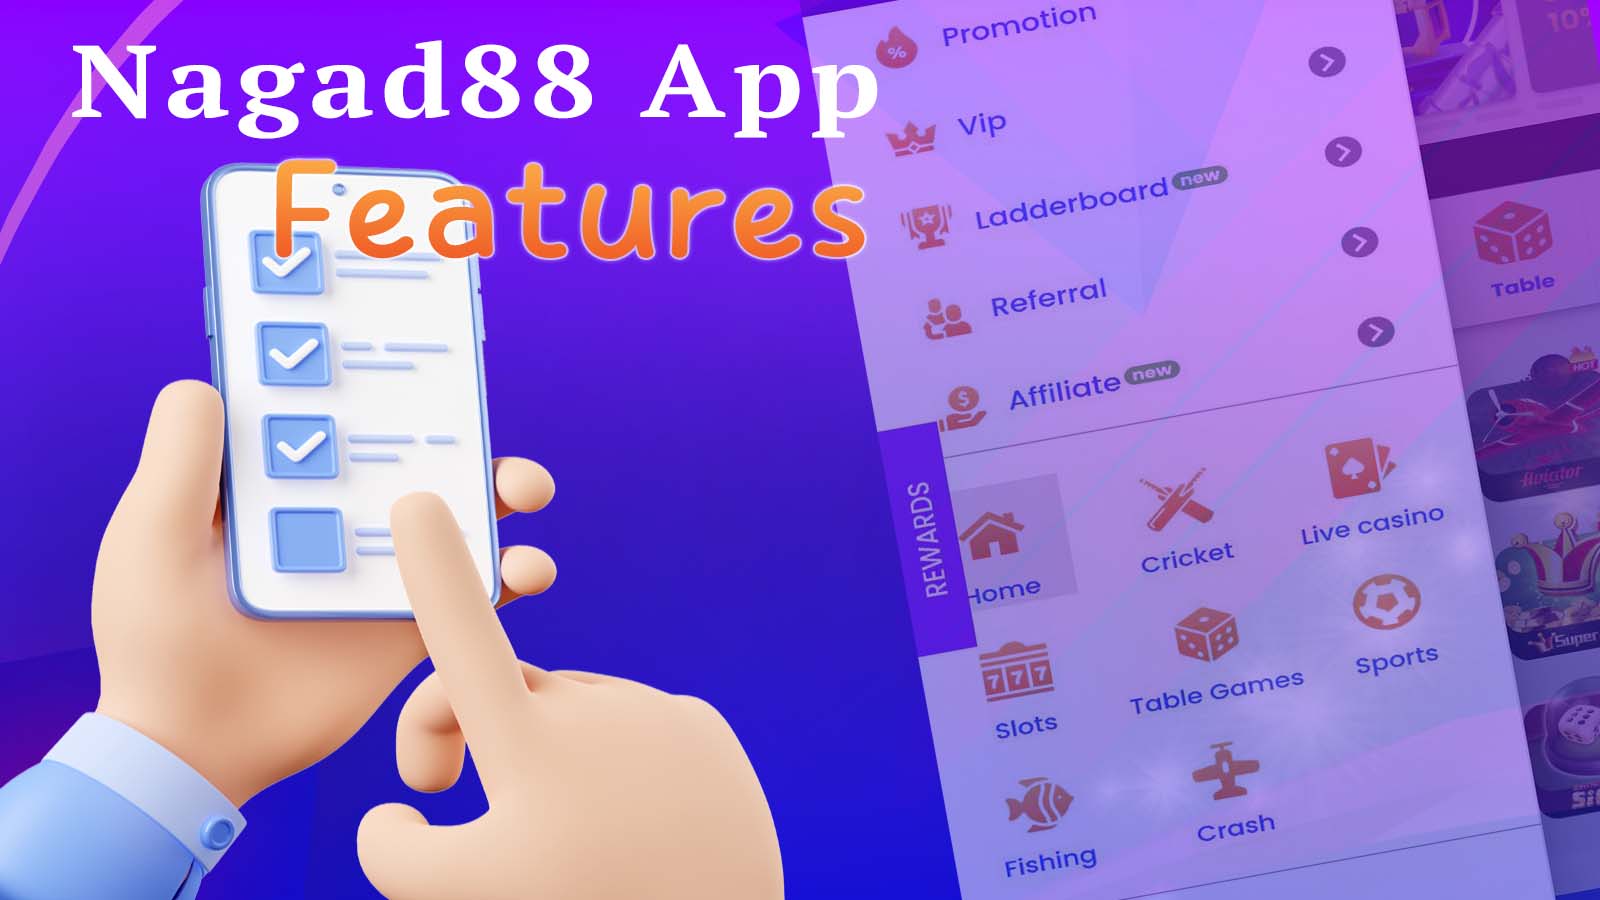 See the features of Nagad88